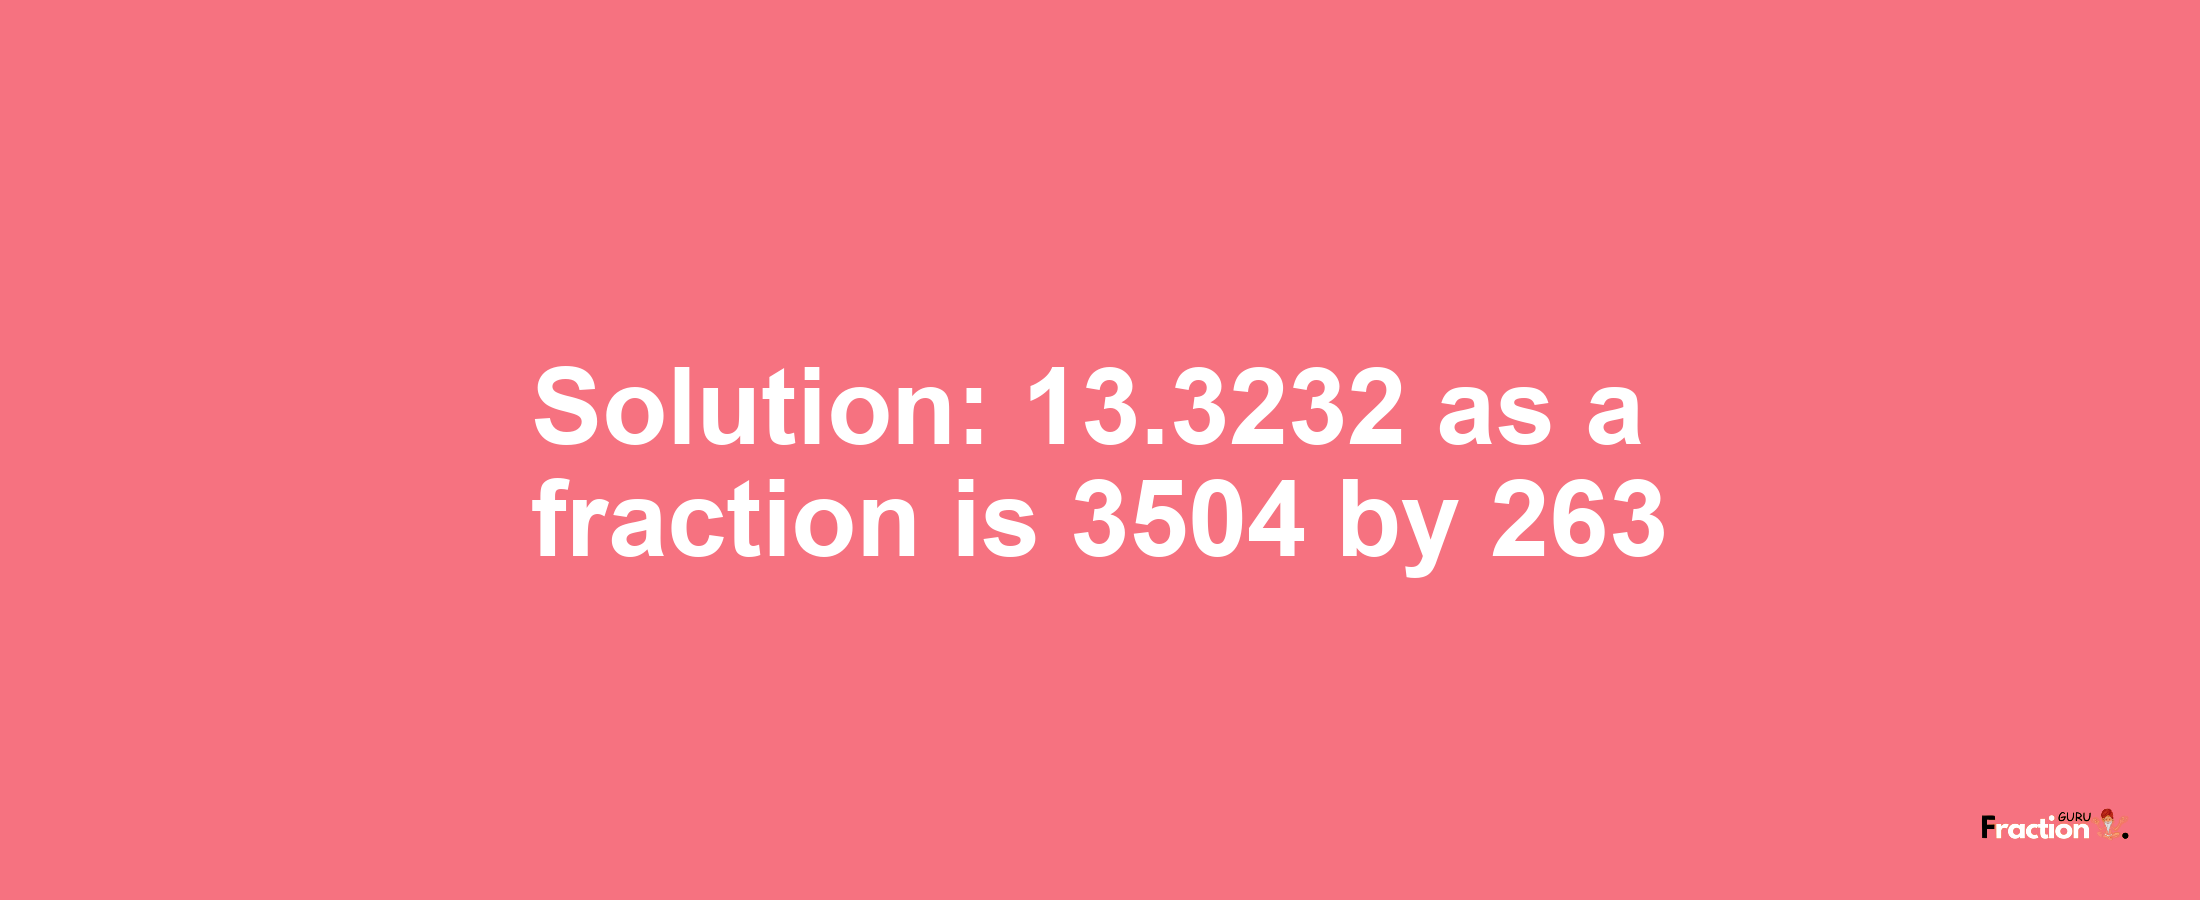 Solution:13.3232 as a fraction is 3504/263